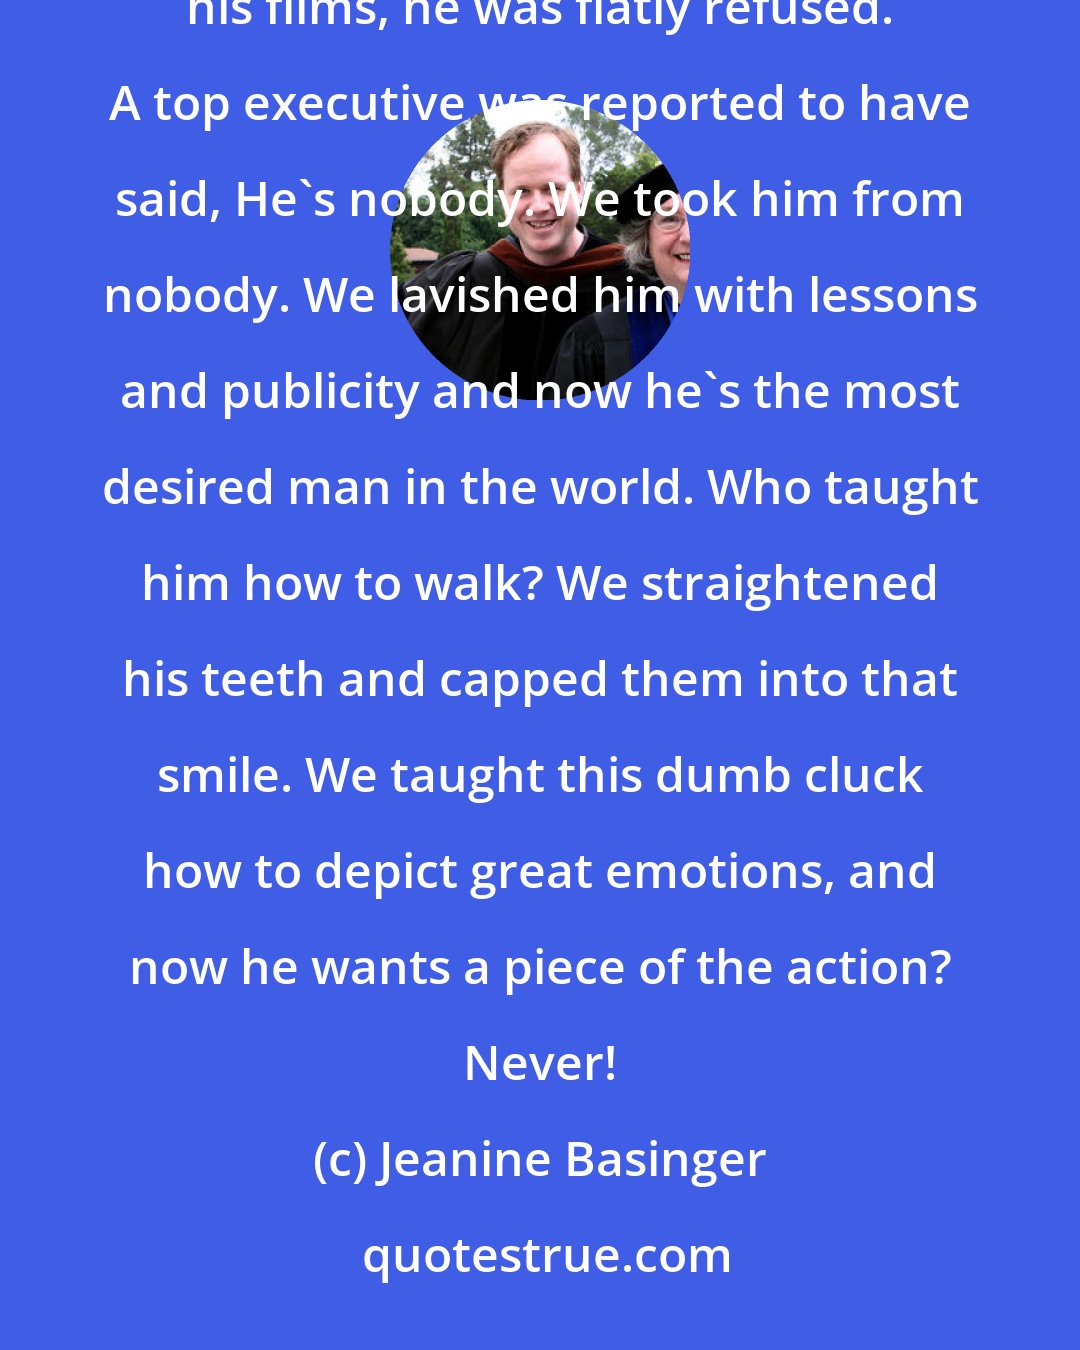 Jeanine Basinger: When Clark Gable, MGM's most popular and famous leading man asked for a percentage of the profits from his films, he was flatly refused. A top executive was reported to have said, He's nobody. We took him from nobody. We lavished him with lessons and publicity and now he's the most desired man in the world. Who taught him how to walk? We straightened his teeth and capped them into that smile. We taught this dumb cluck how to depict great emotions, and now he wants a piece of the action? Never!